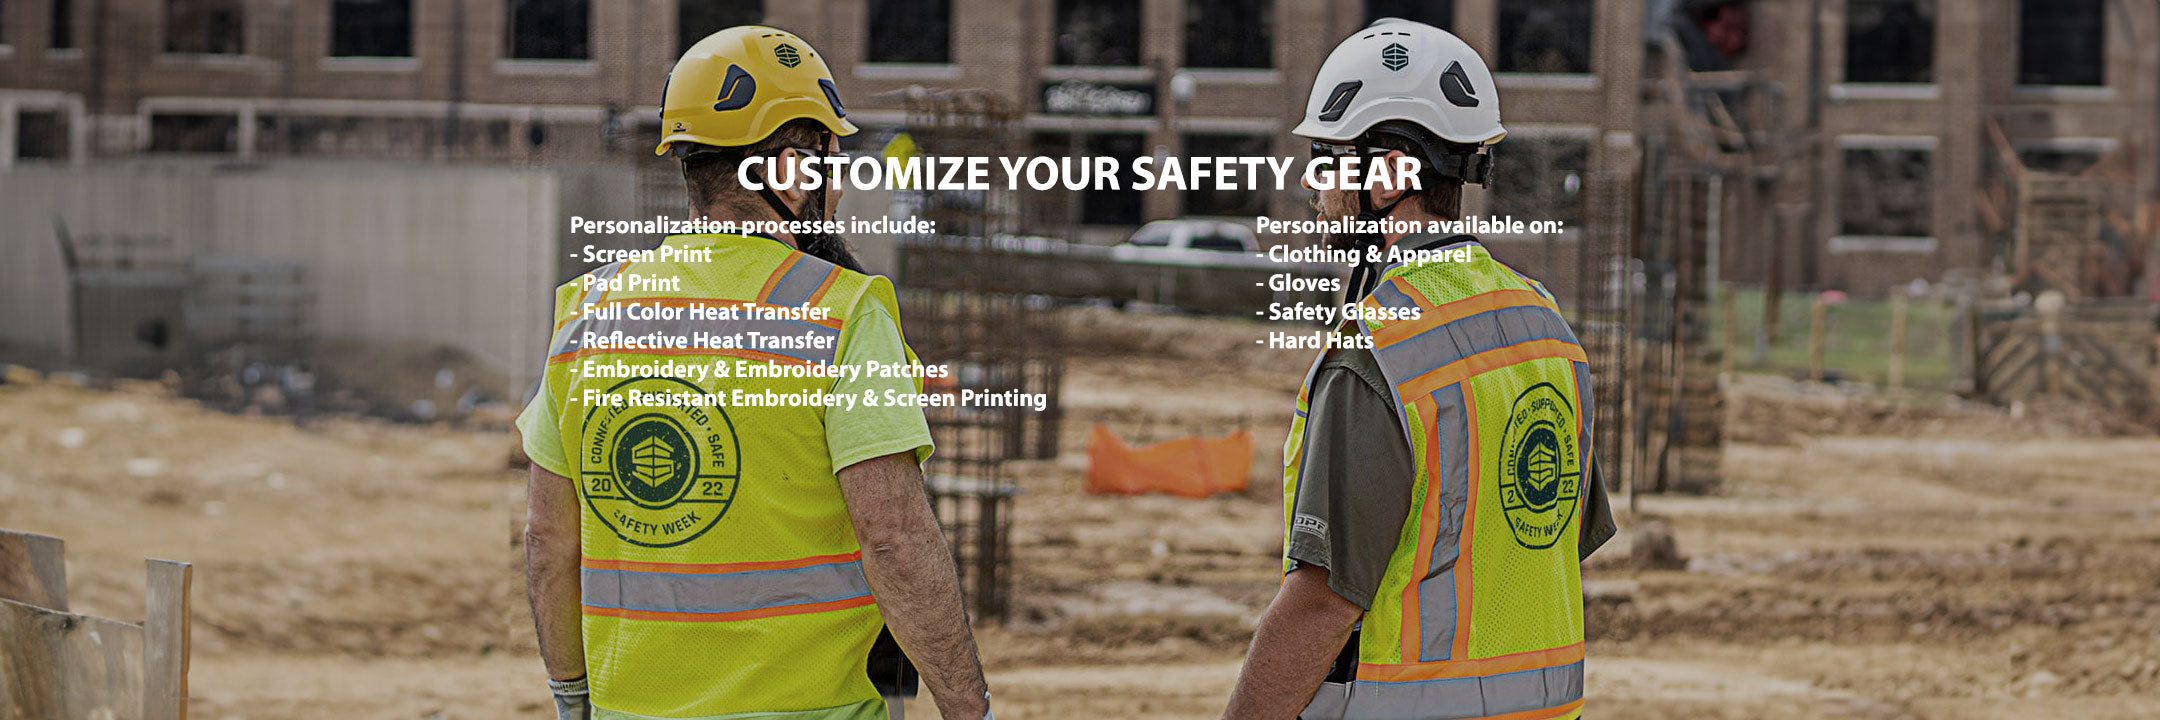 Safety Products Inc - Occupational Safety, Facility Equipment, First Aid  and Traffic Control Products